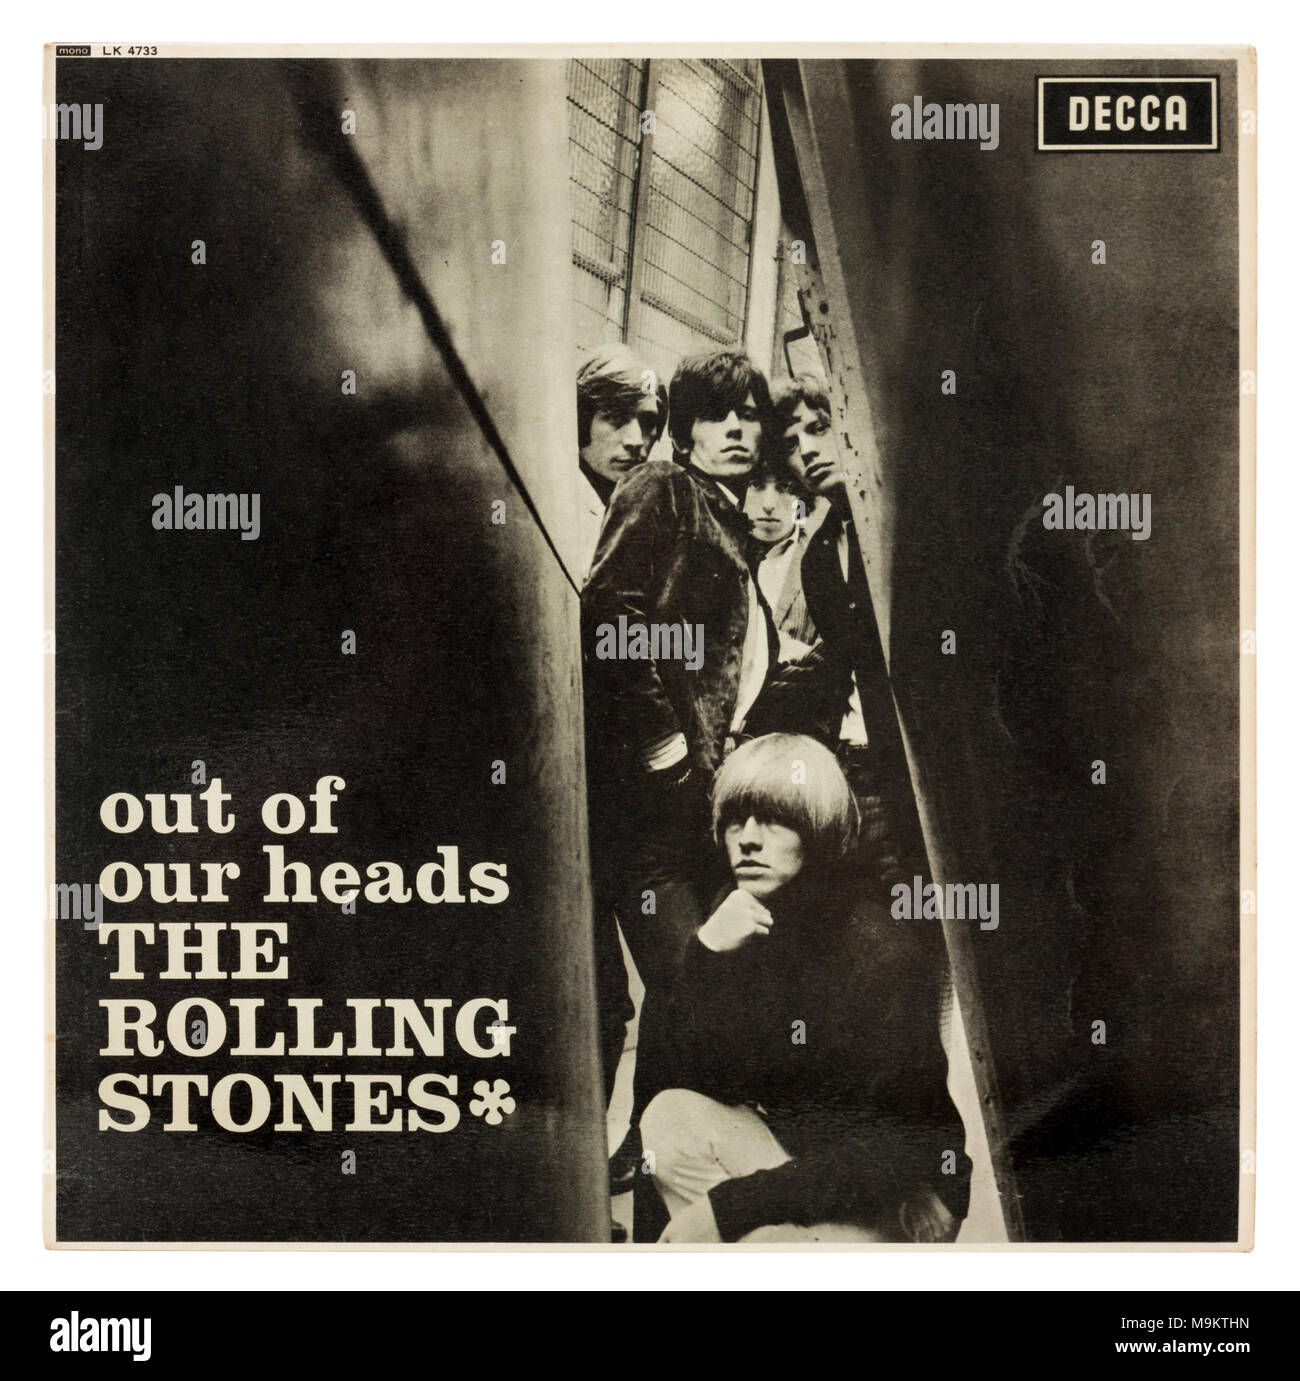 Original 1965 'Out of Our Heads' LP by The Rolling Stones (Decca LK4733 Mono) Stock Photo